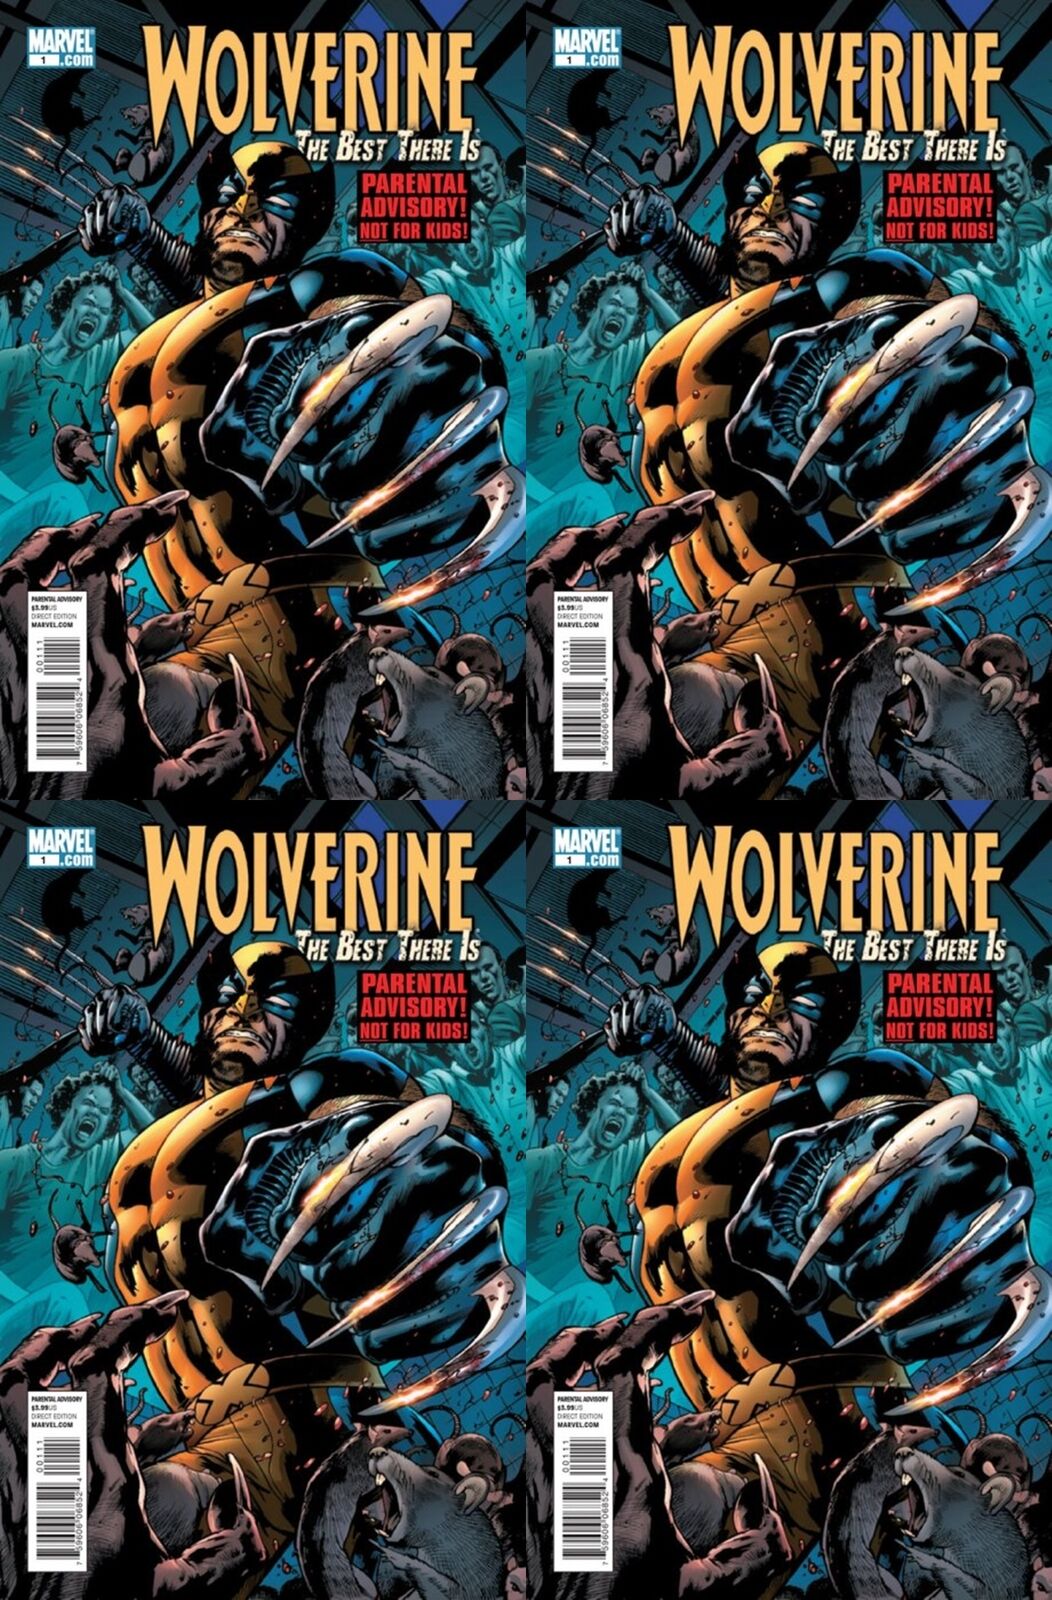 Wolverine: The Best There Is #1 (2011-2012) Marvel Comics - 4 Comics